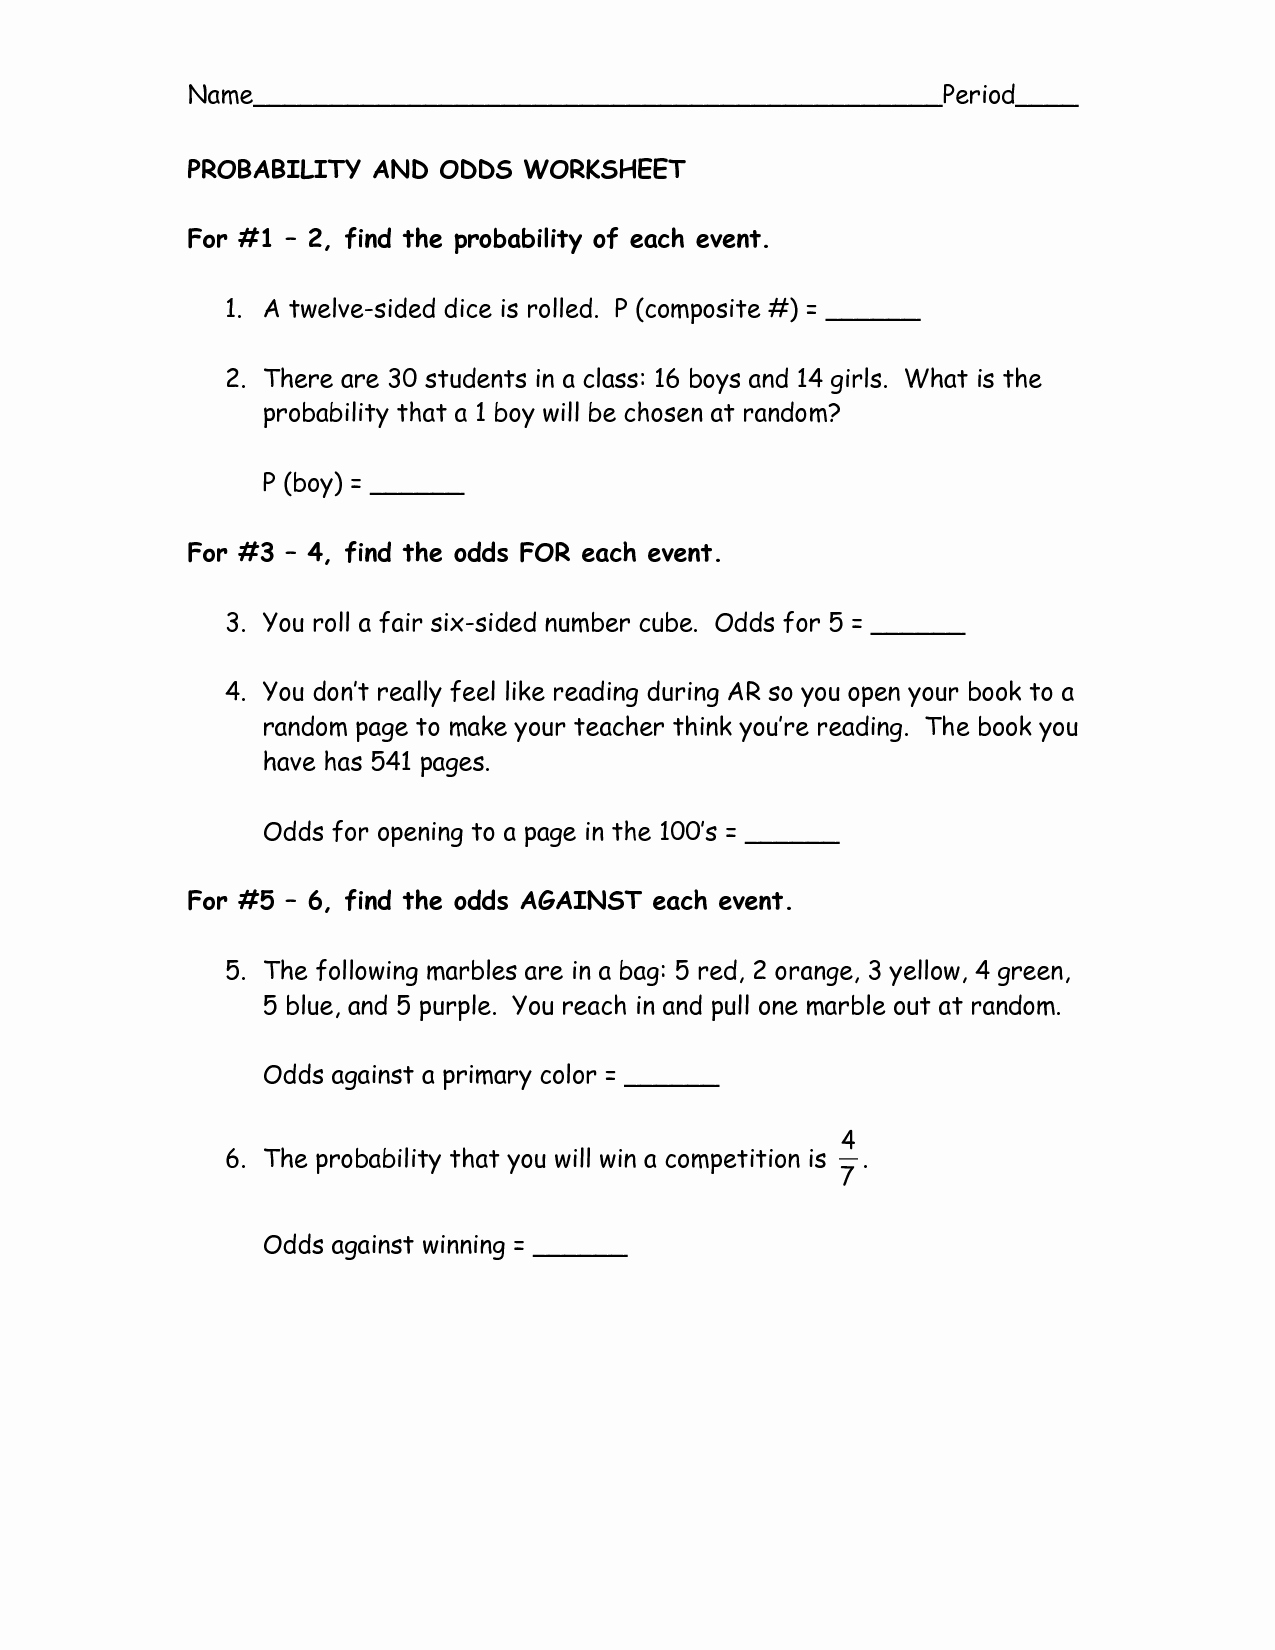 Theoretical and Experimental Probability Worksheet Awesome 13 Best Of Probability Worksheets Pdf Probability